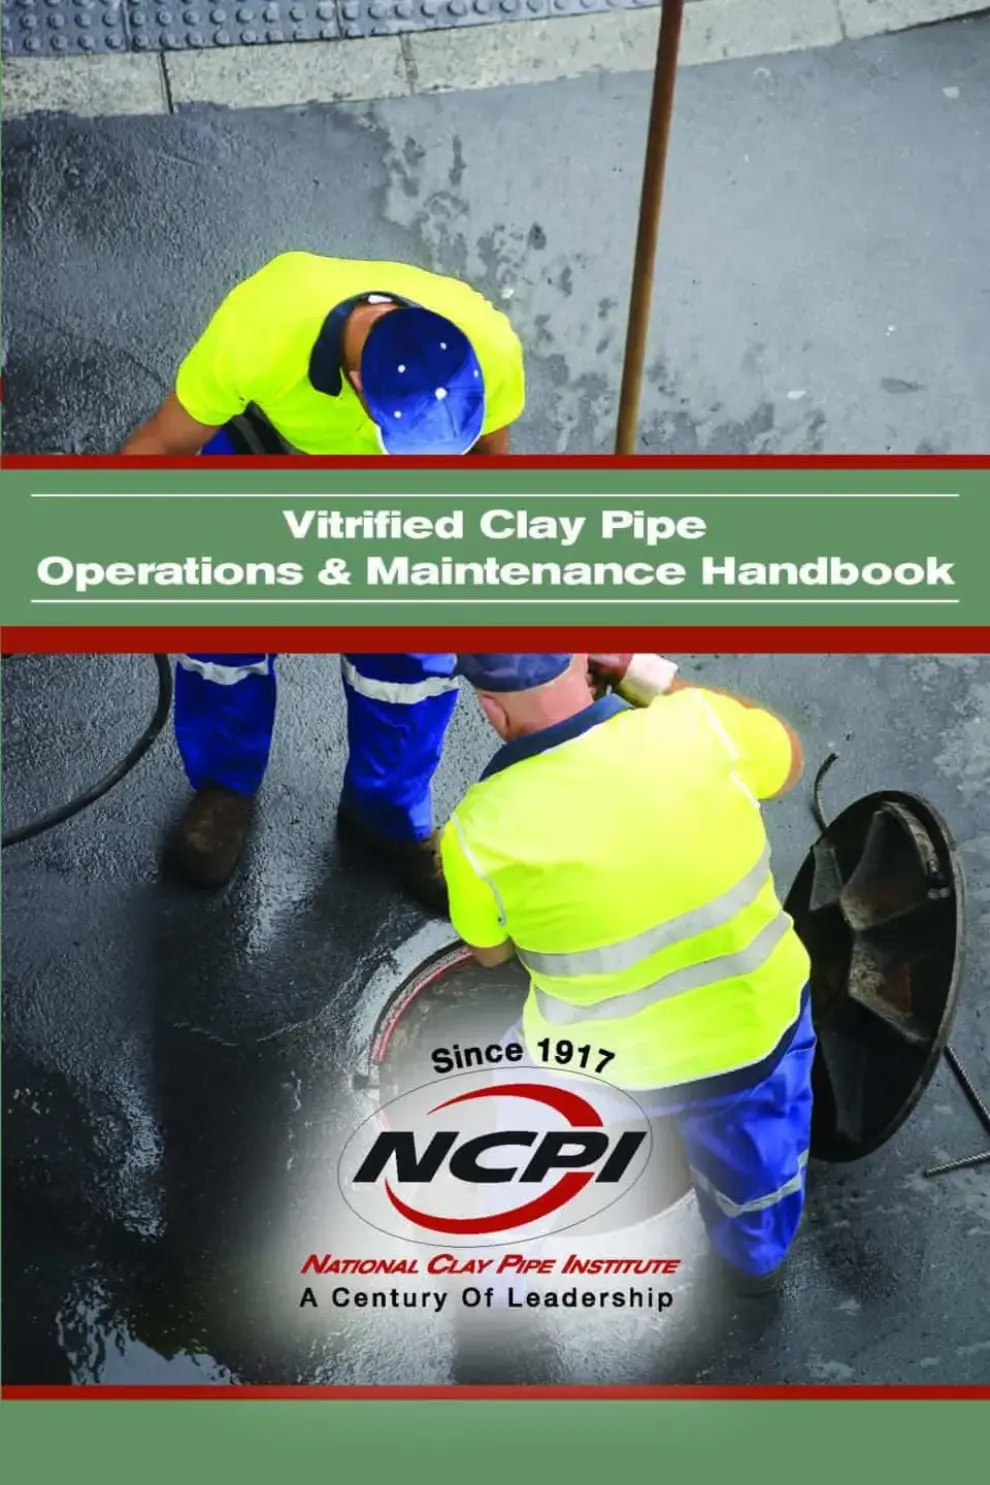 NCPI Introduces an Industry-First  Operations & Maintenance Handbook